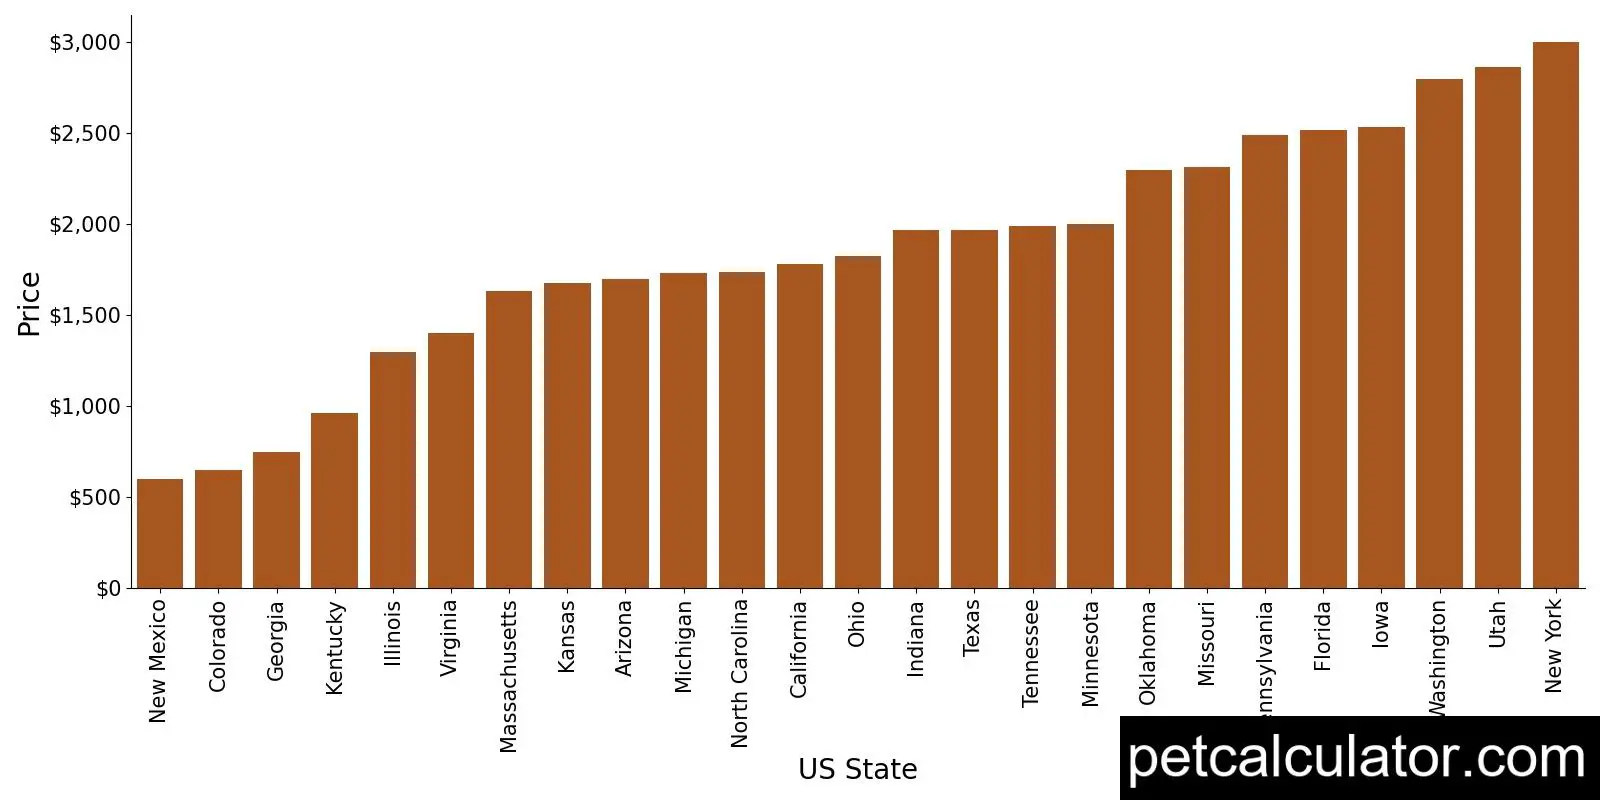 Price of Old English Sheepdog by US State 